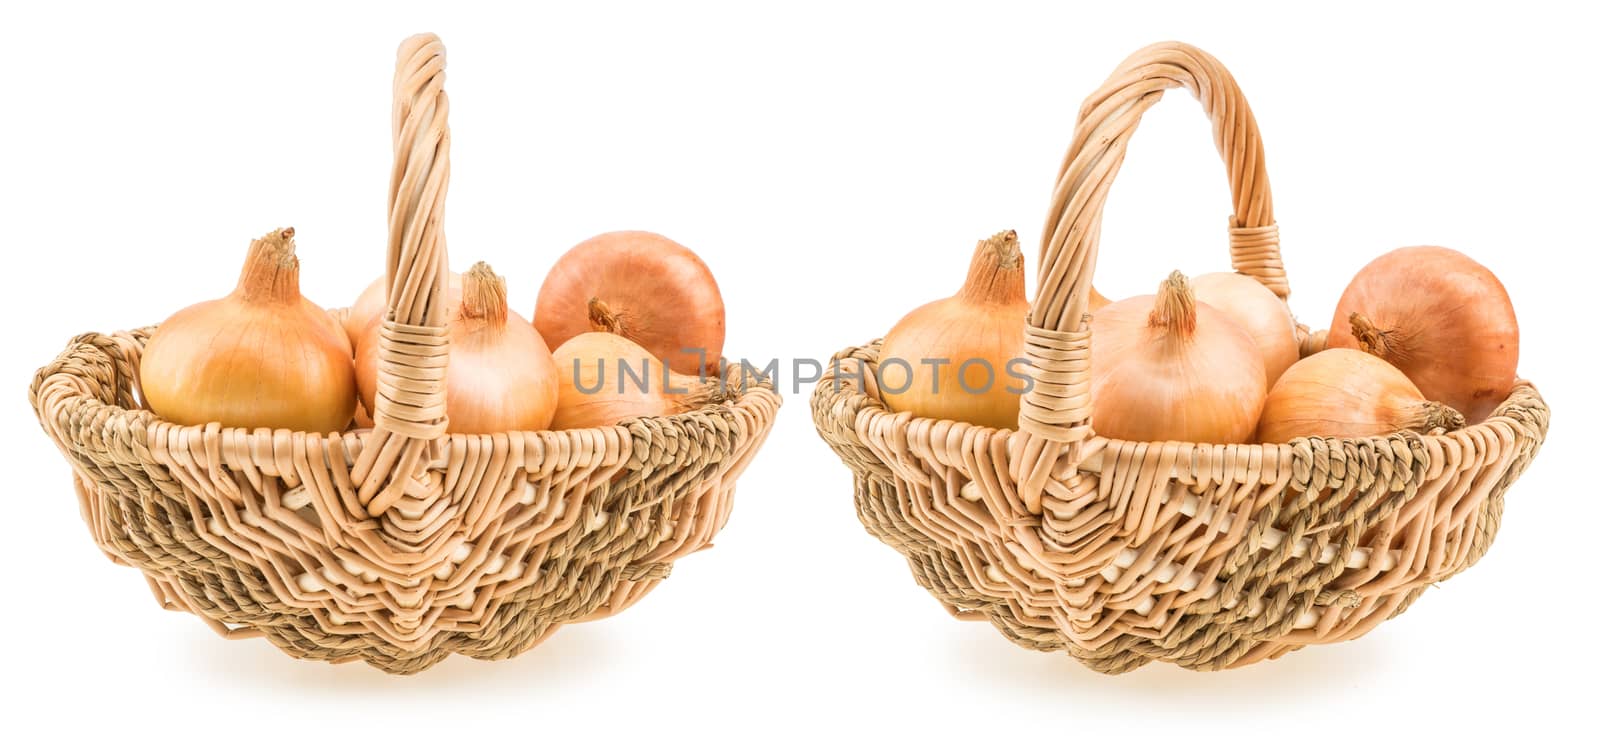 onions in a basket isolated on white background. Selective focus.